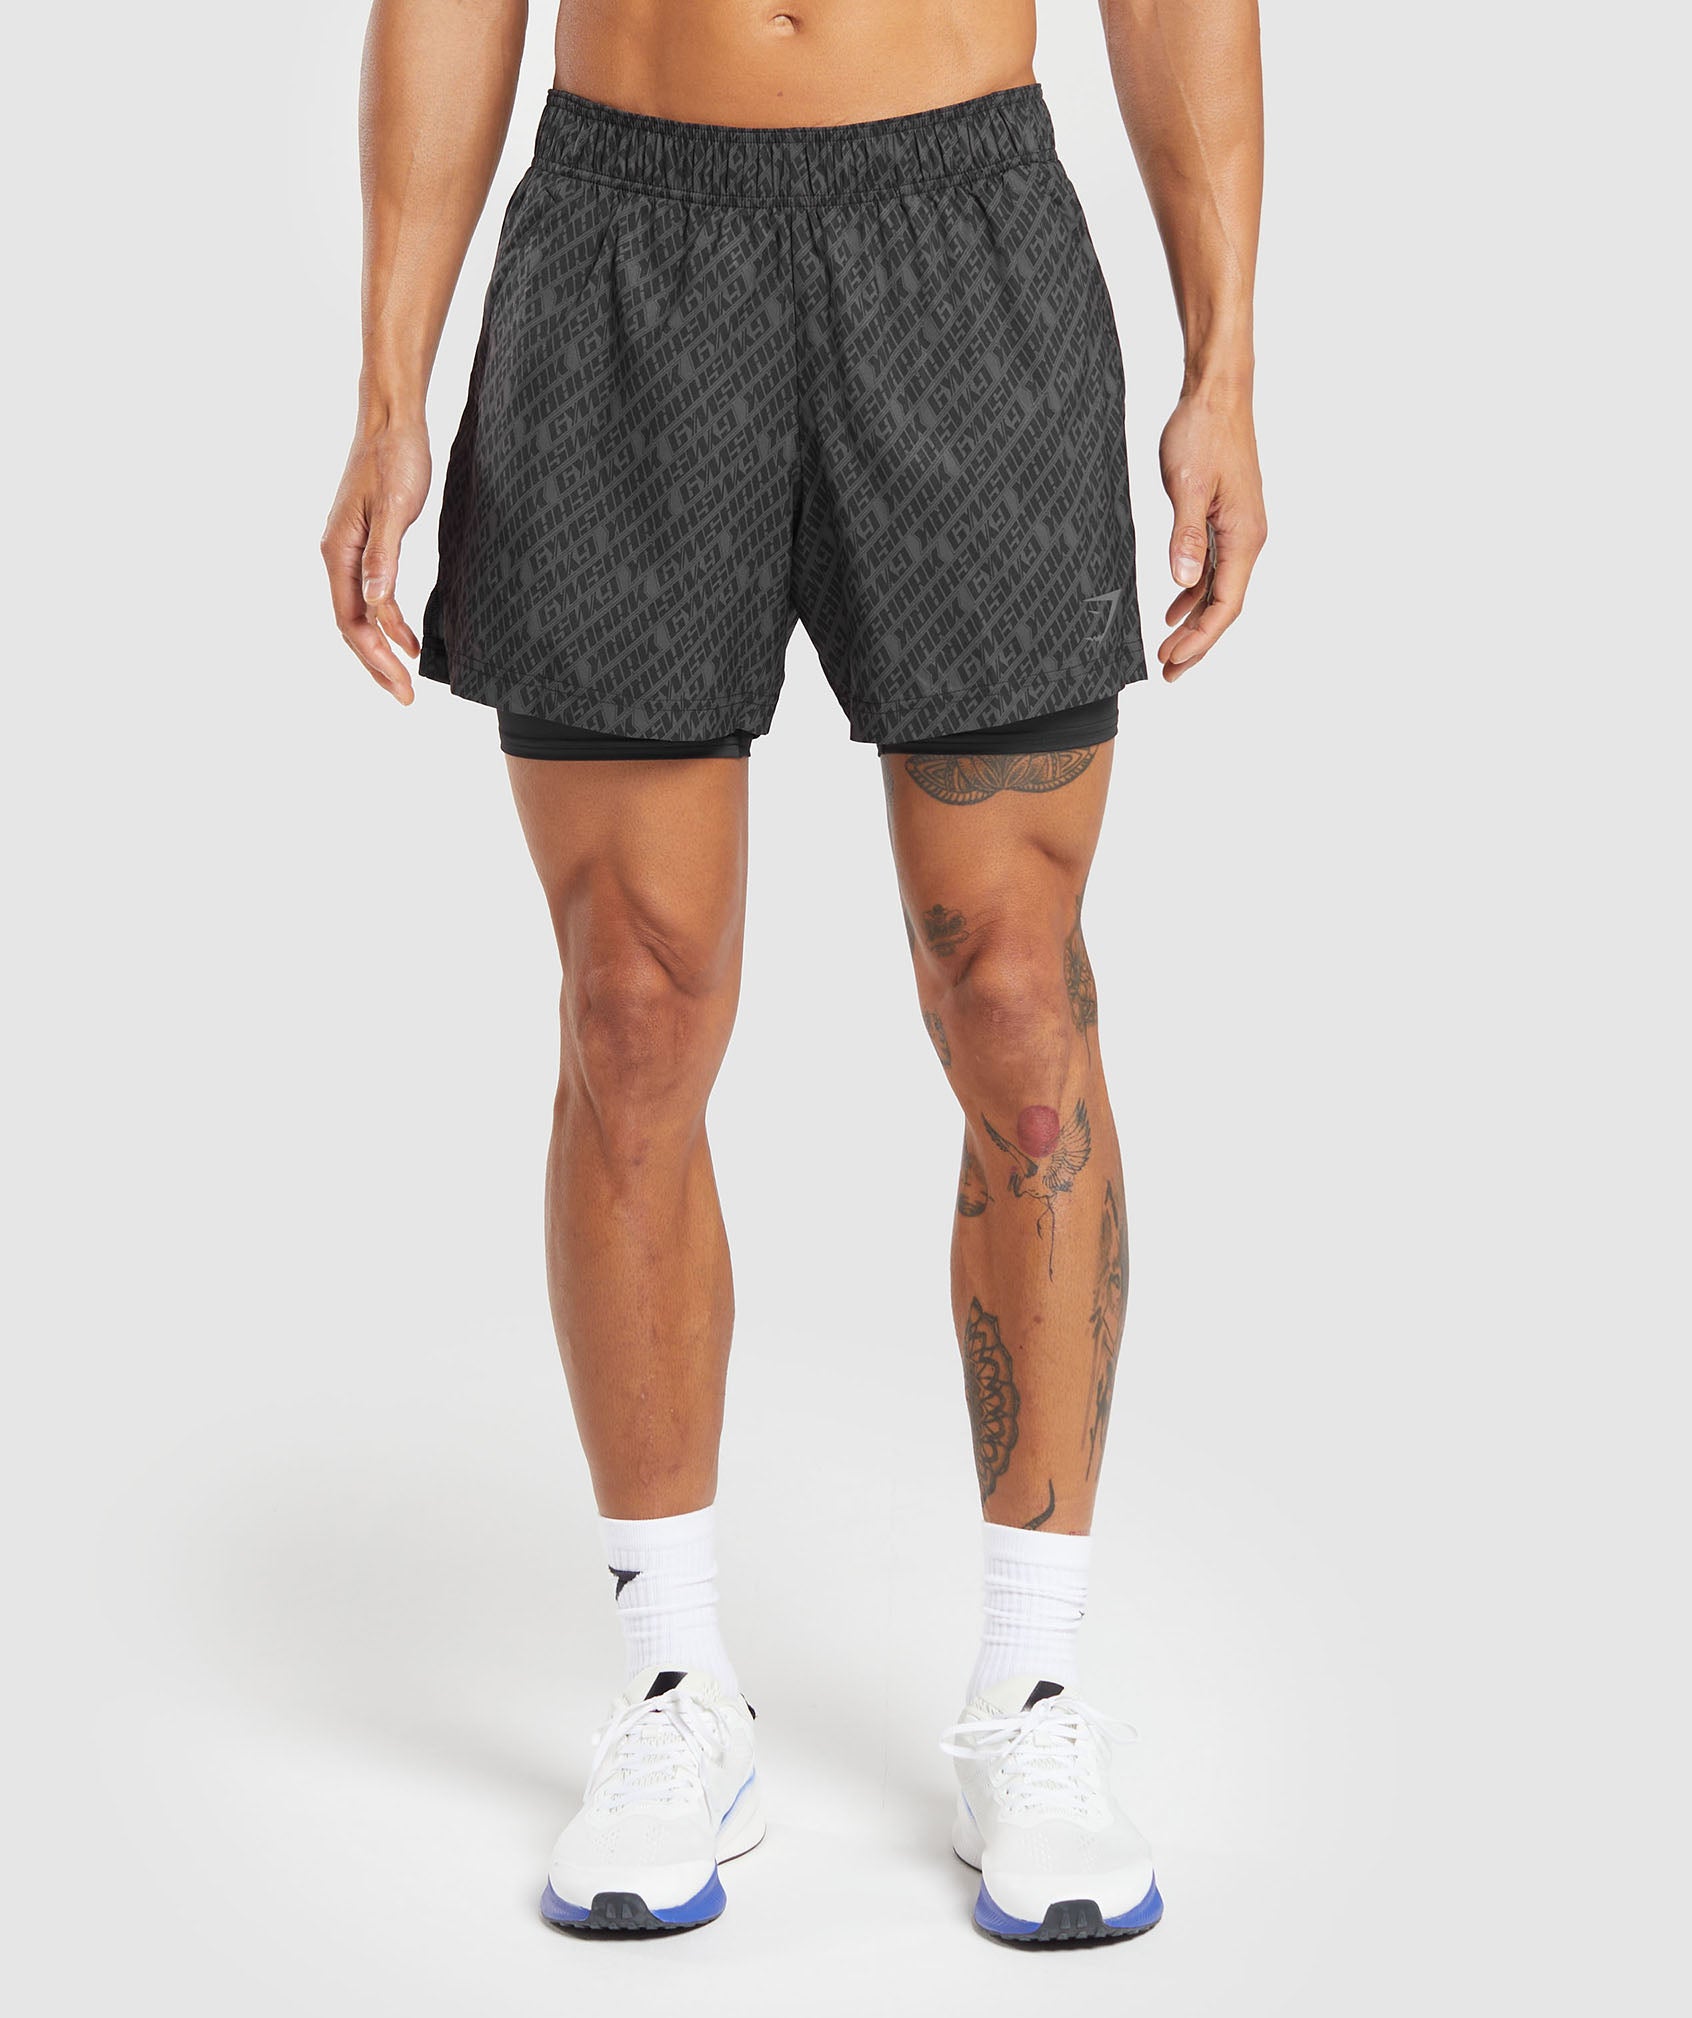 Sport 5" 2 In 1 Shorts in Asphalt Grey/Black is out of stock